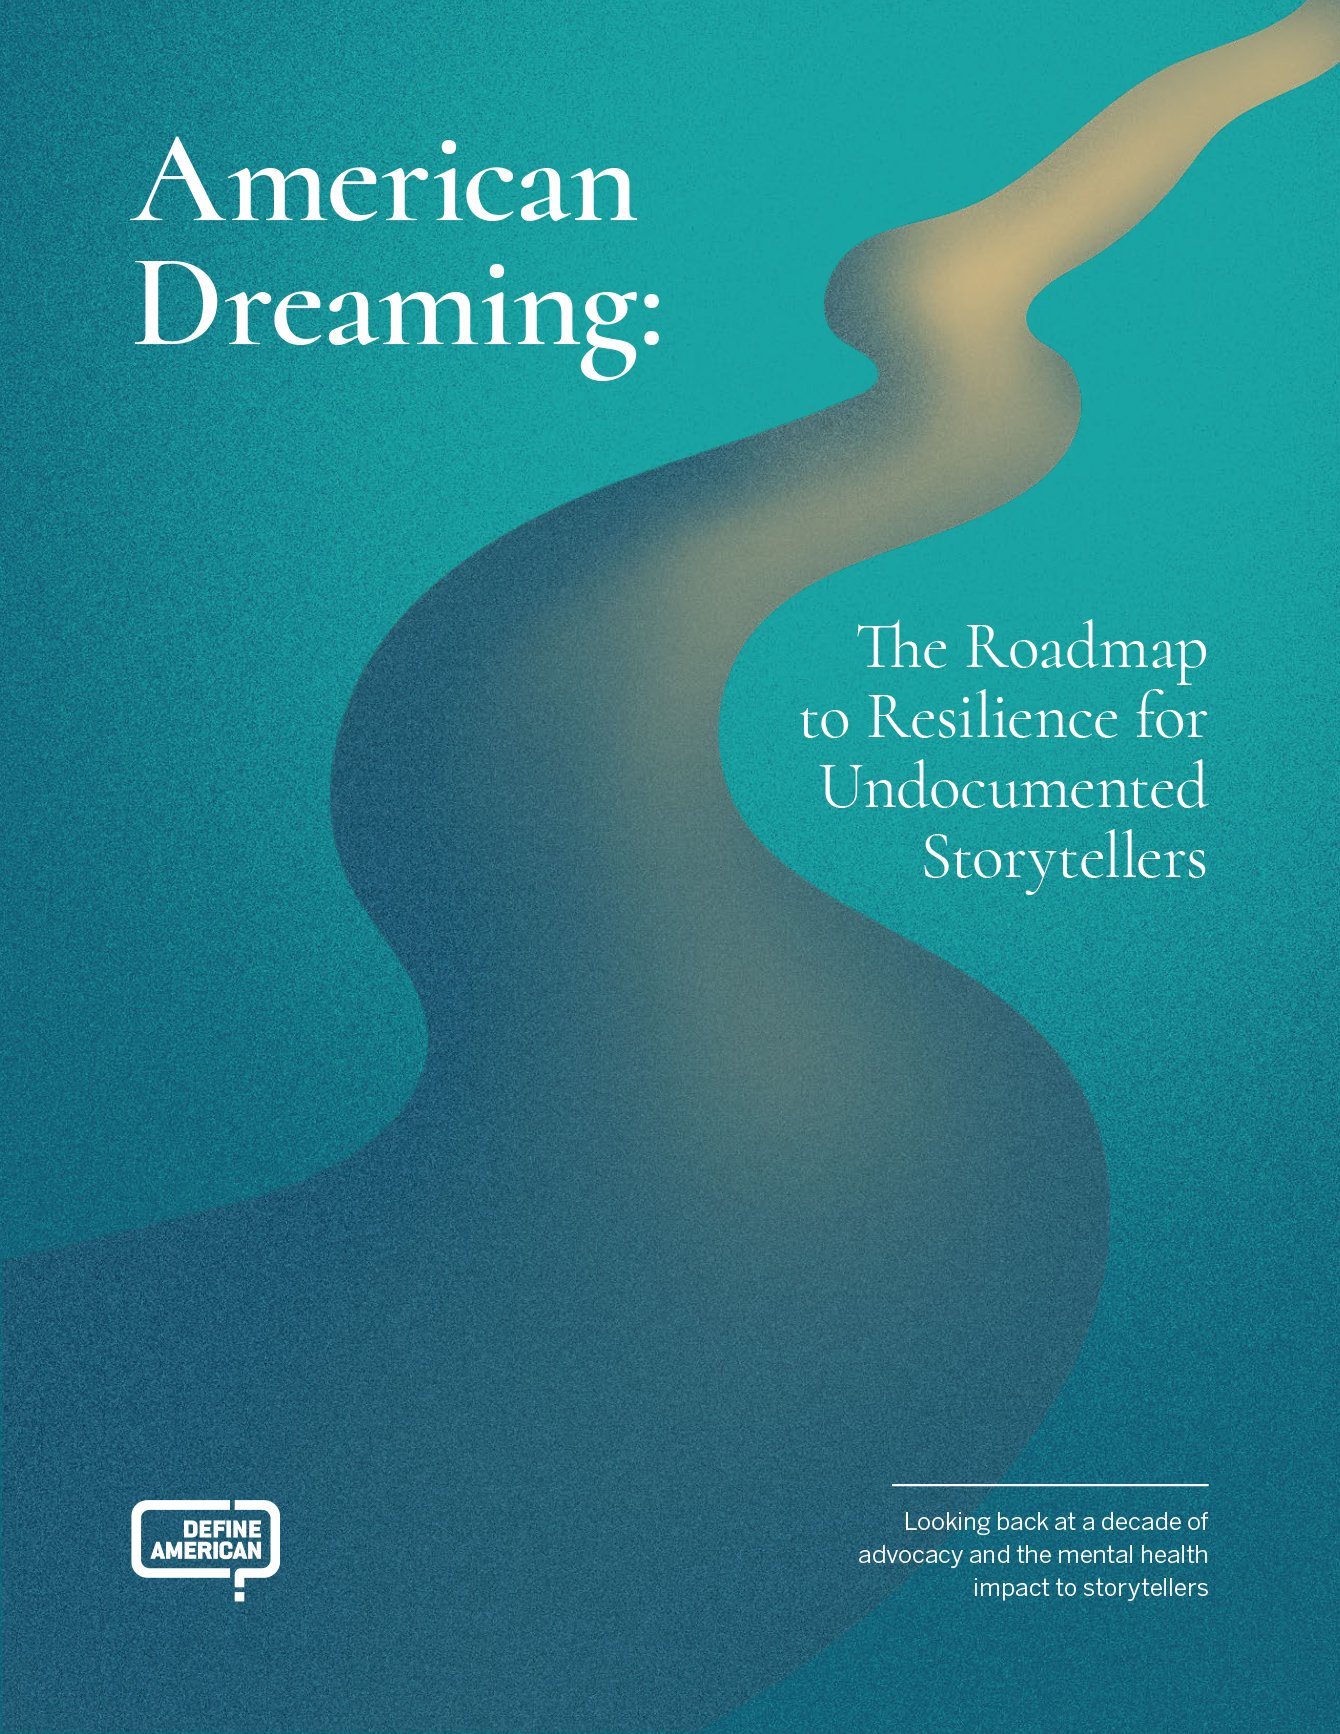 Report cover in cool aqua, green, and blue. An illustration of a curving road leads from the bottom left into the top right corner. The serif title text says 'American Dreaming: The Roadmap to Resilience for Undocumented Storytellers'. The sans-serif subtitle says 'Looking back at a decade of advocacy and the mental health impact to storytellers.'